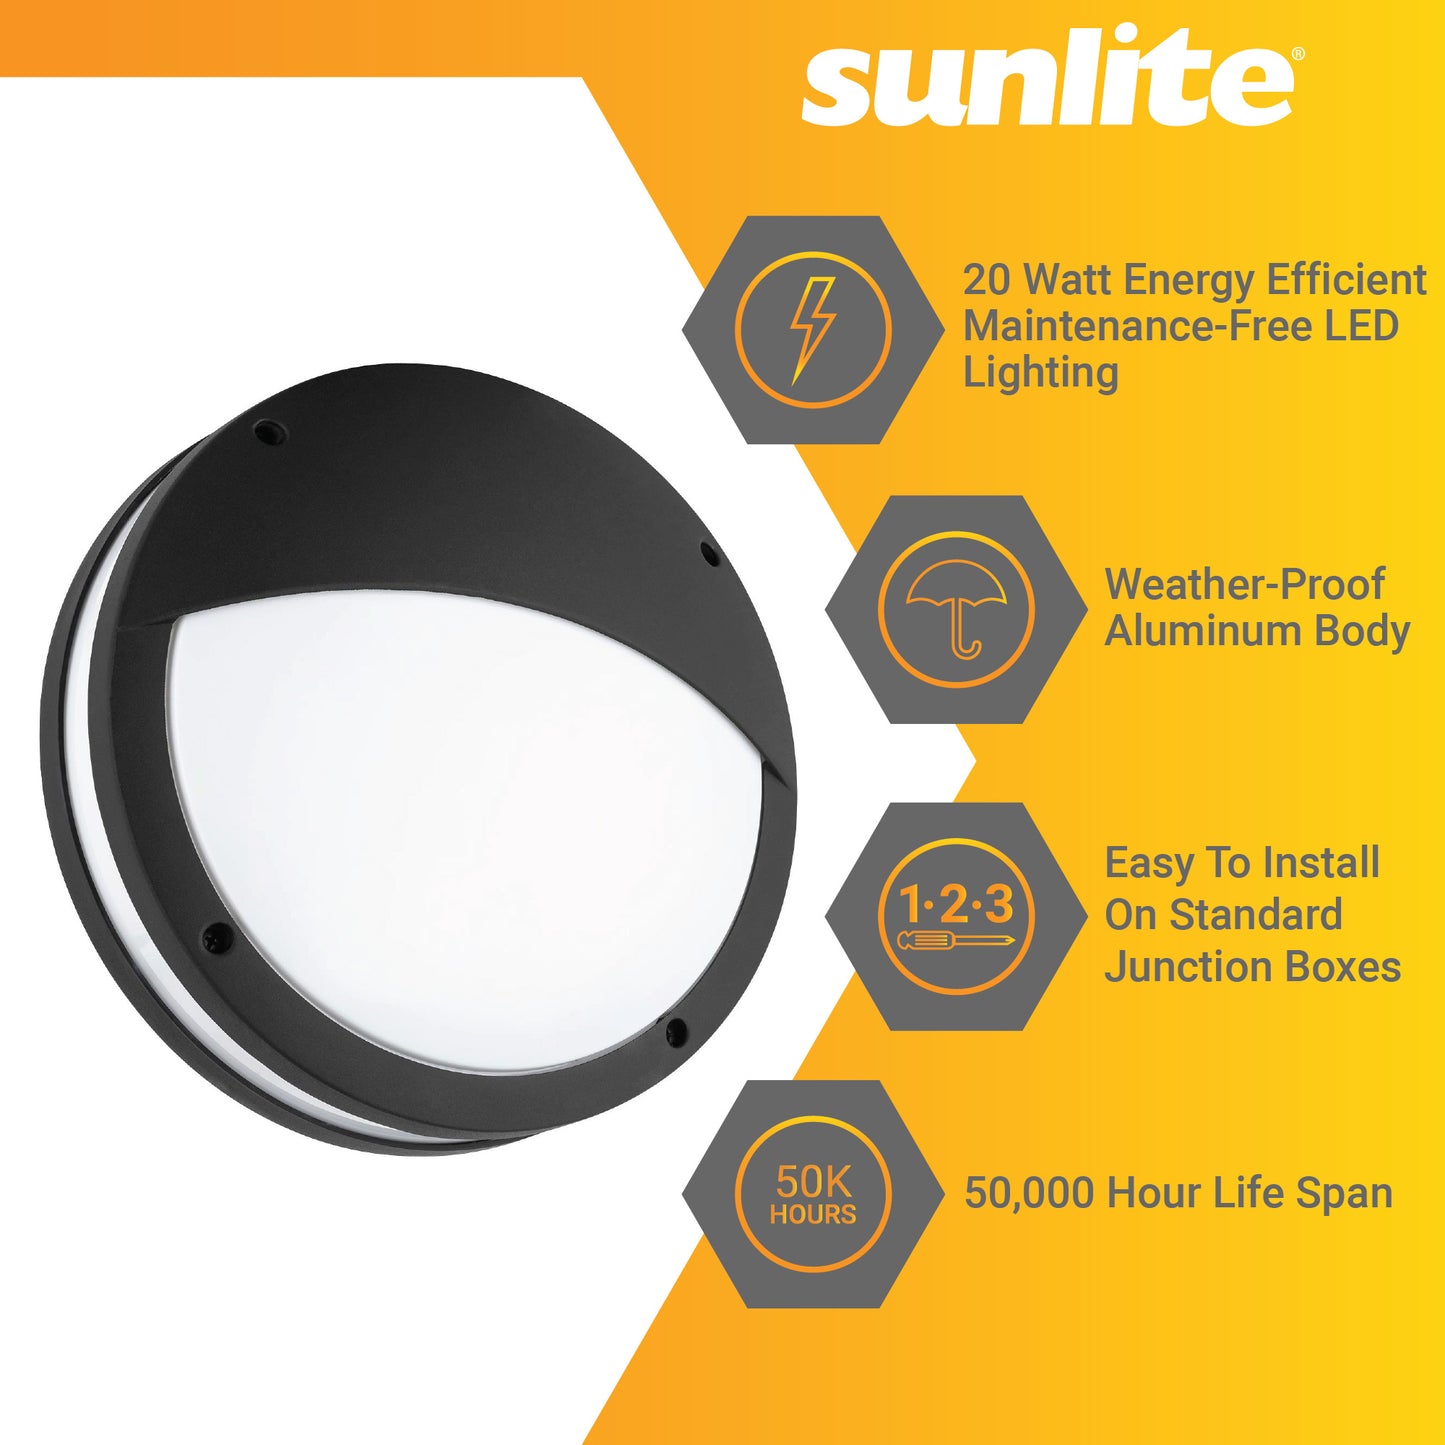 Sunlite 11" Round LED Decorative Outdoor Wall Fixture, 20 Watt, 120 Volt, Dimmable, 1000 Lumens, Wall Mount, Textured Black Finish, White Acrylic Lens, 50,000 Hour Life Span, ETL Listed, 3000K Warm White